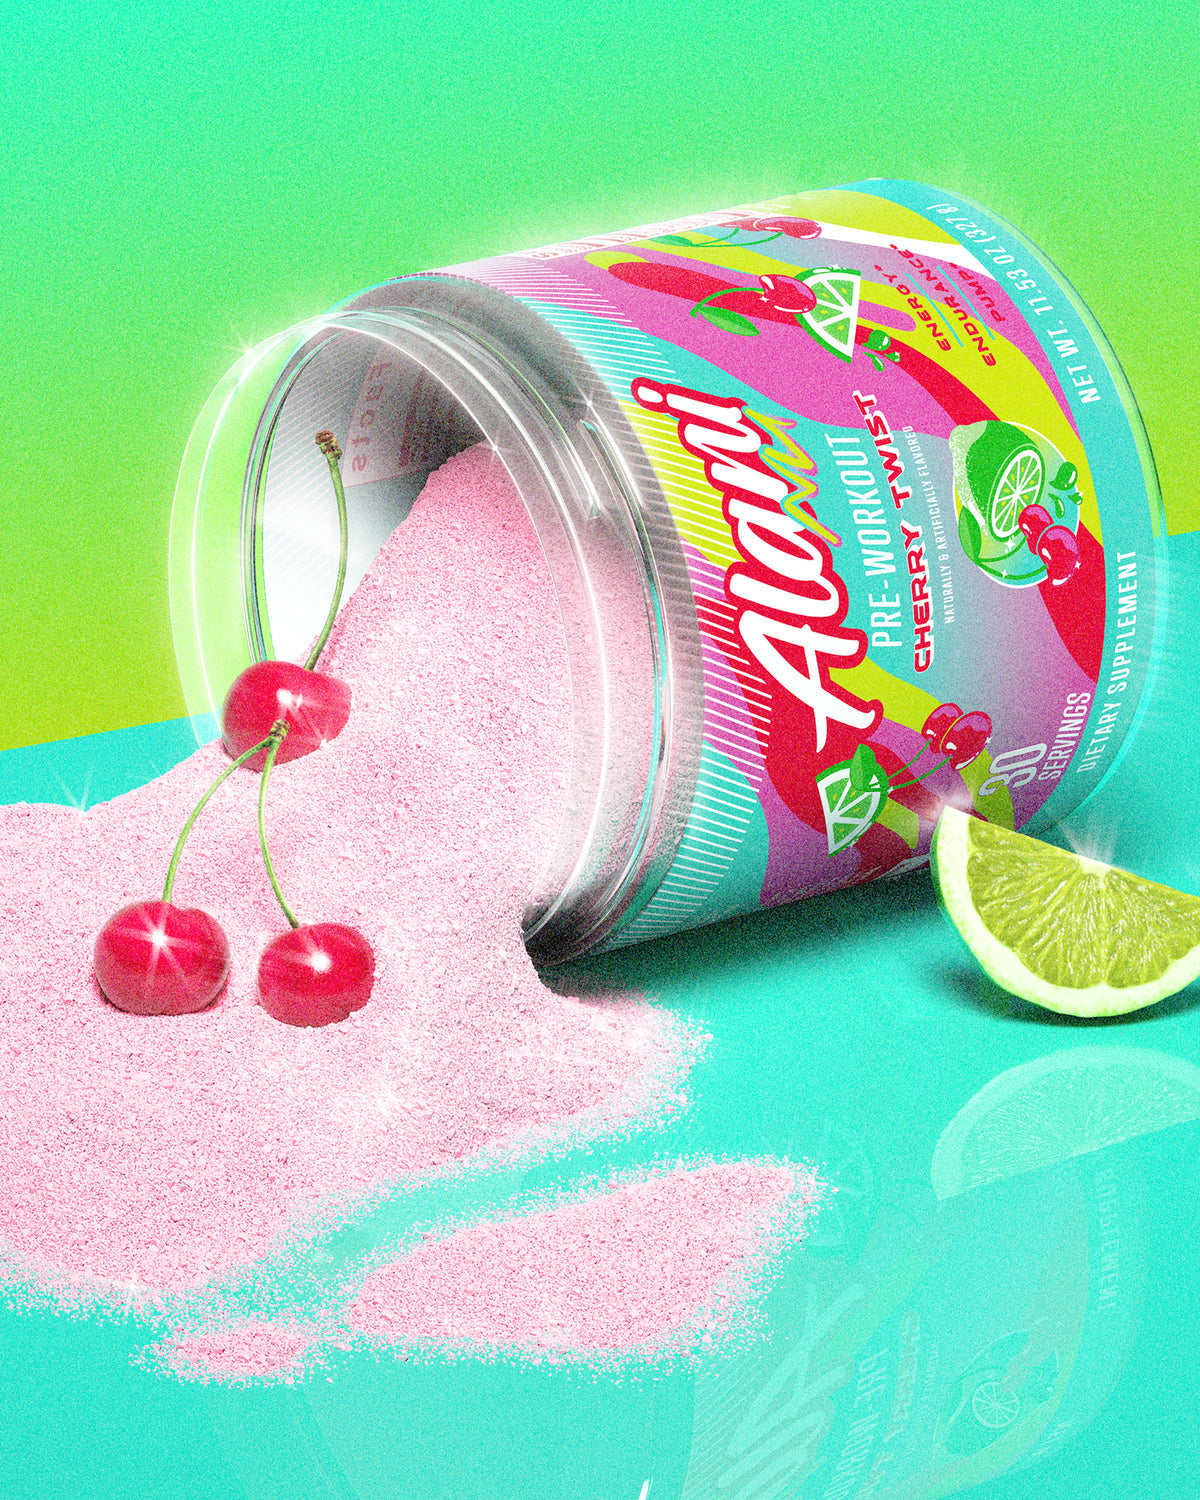 An overturned container of Alani Nu Cherry Twist pre-workout powder spills onto a teal surface, accompanied by fresh cherries and a slice of lime, 